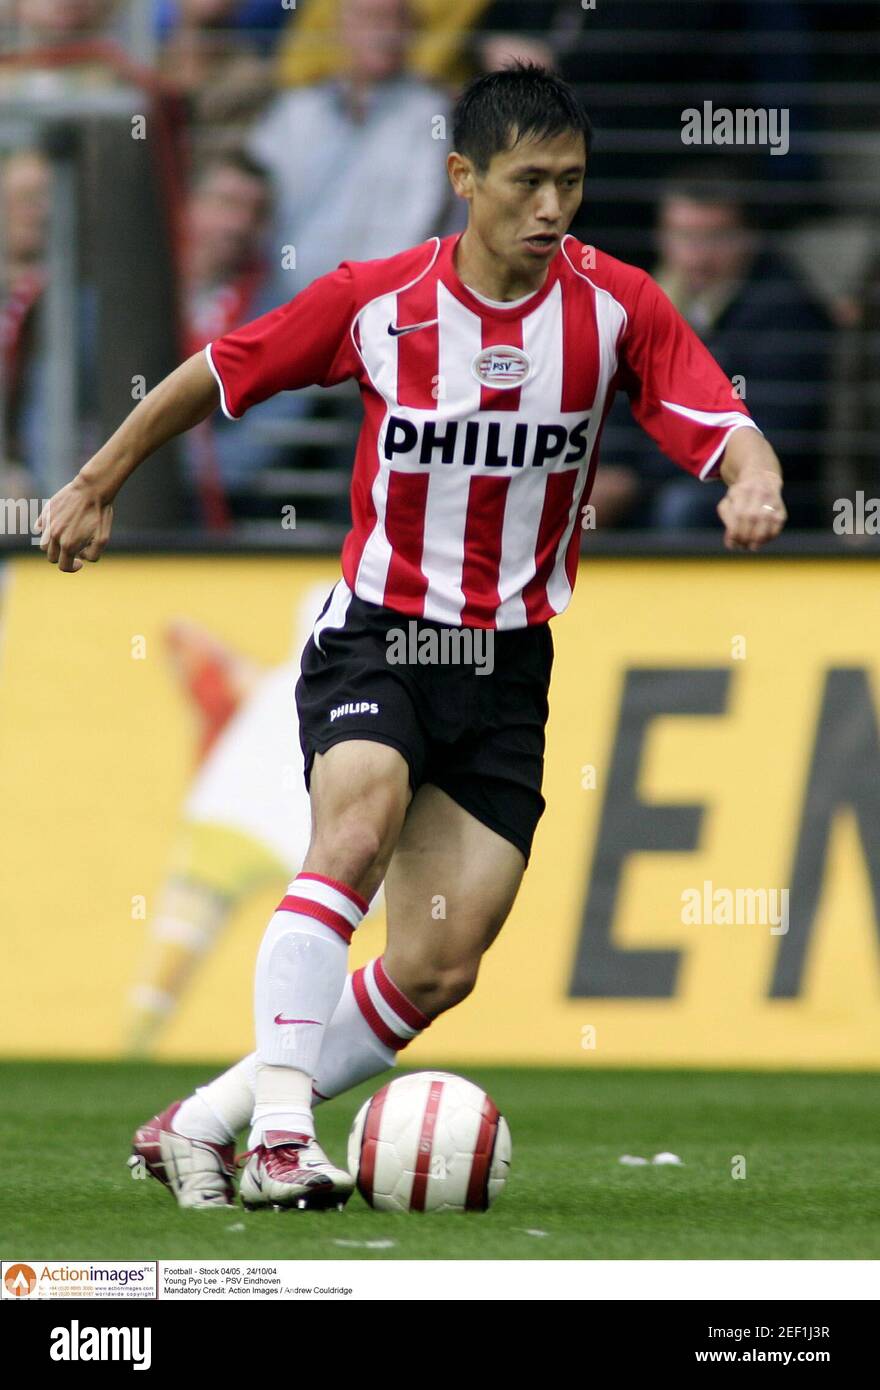 Football - Stock 04/05 , 24/10/04 Young Pyo Lee - PSV Eindhoven Mandatory  Credit: Action Images / Andrew Couldridge Stock Photo - Alamy